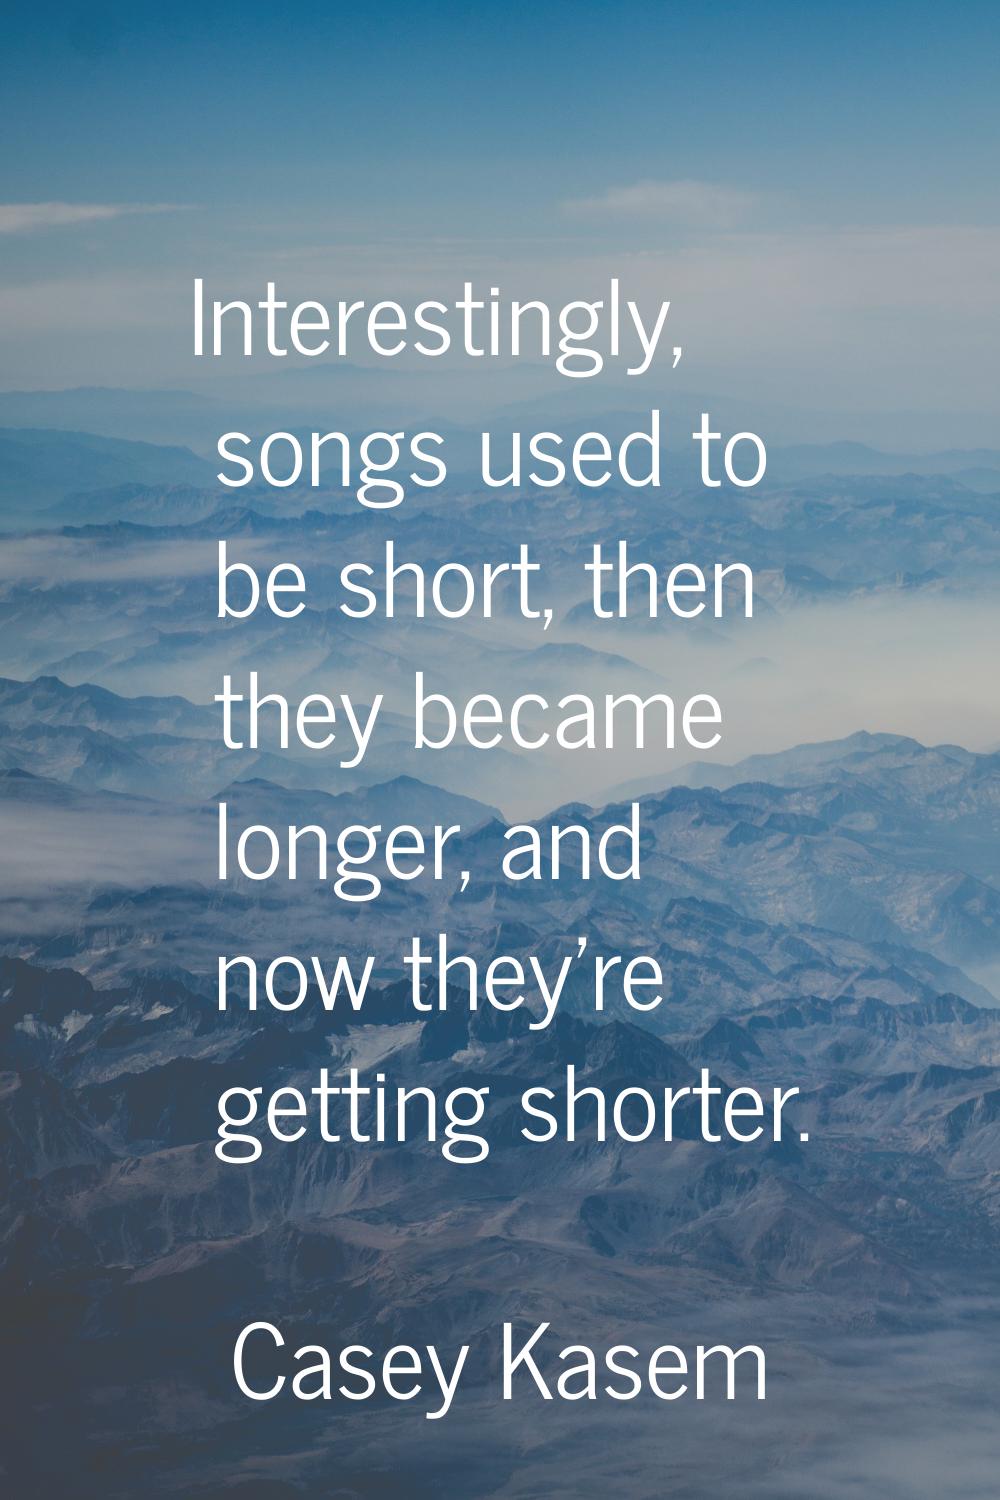 Interestingly, songs used to be short, then they became longer, and now they're getting shorter.